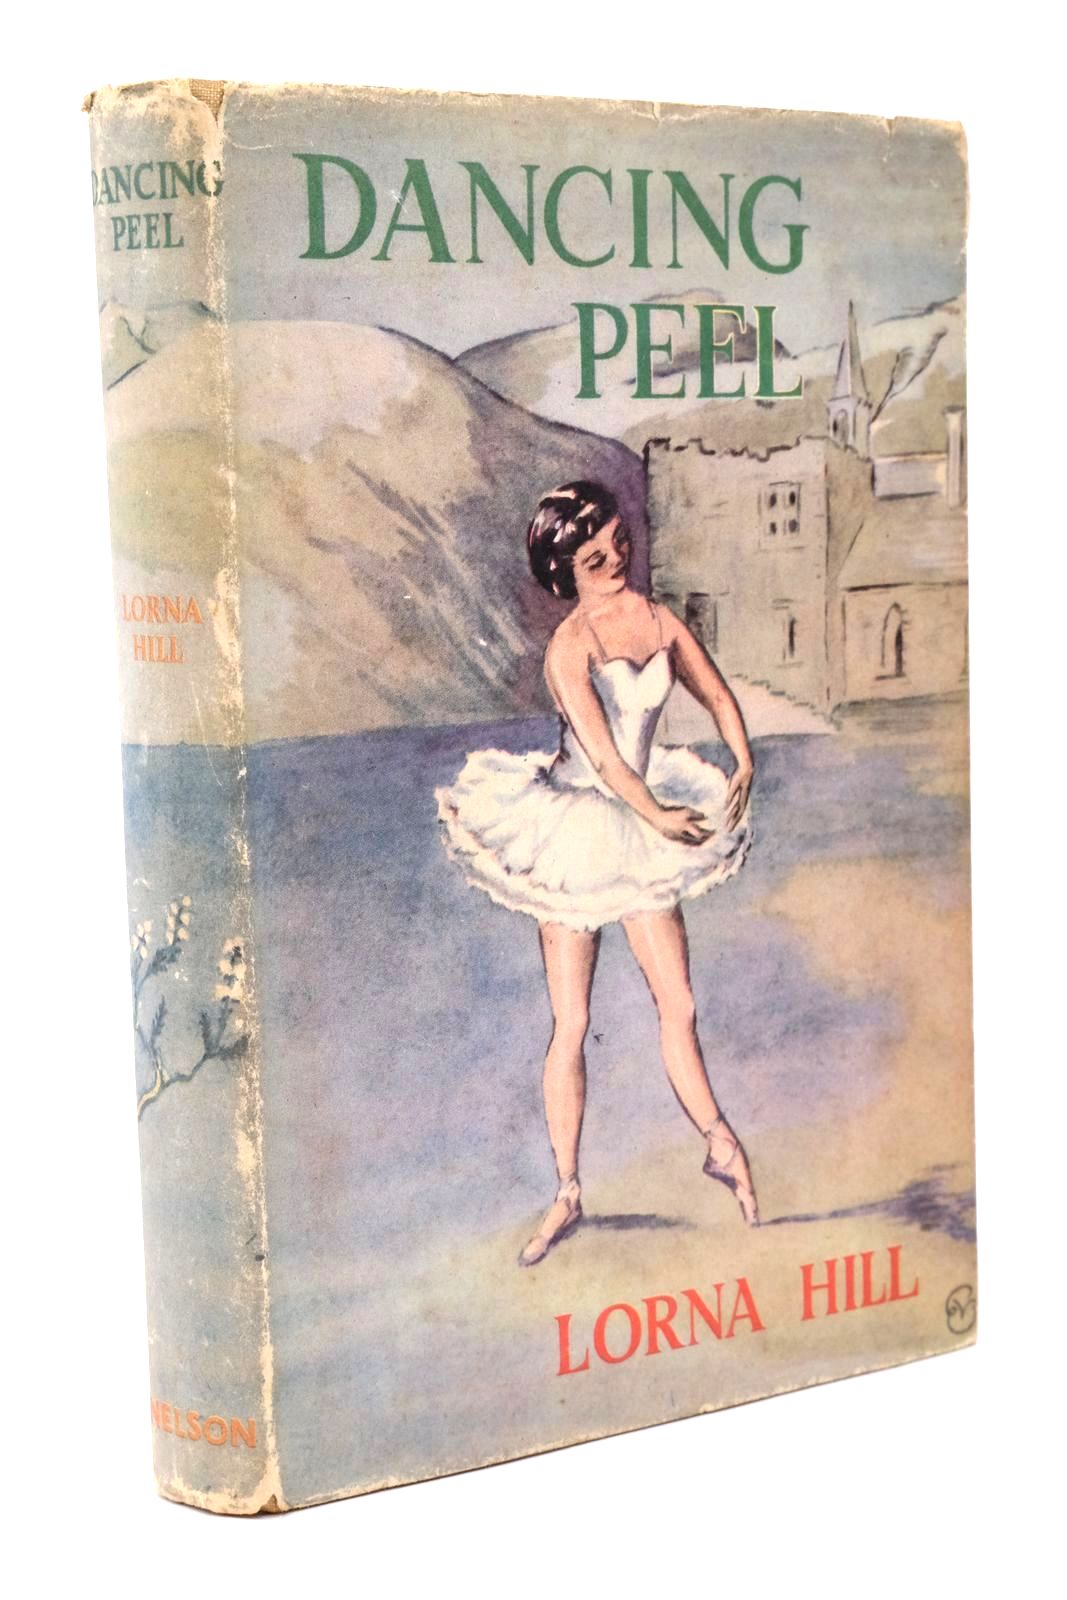 Photo of DANCING PEEL written by Hill, Lorna illustrated by Verity, Esme published by Thomas Nelson and Sons Ltd. (STOCK CODE: 1322549)  for sale by Stella & Rose's Books